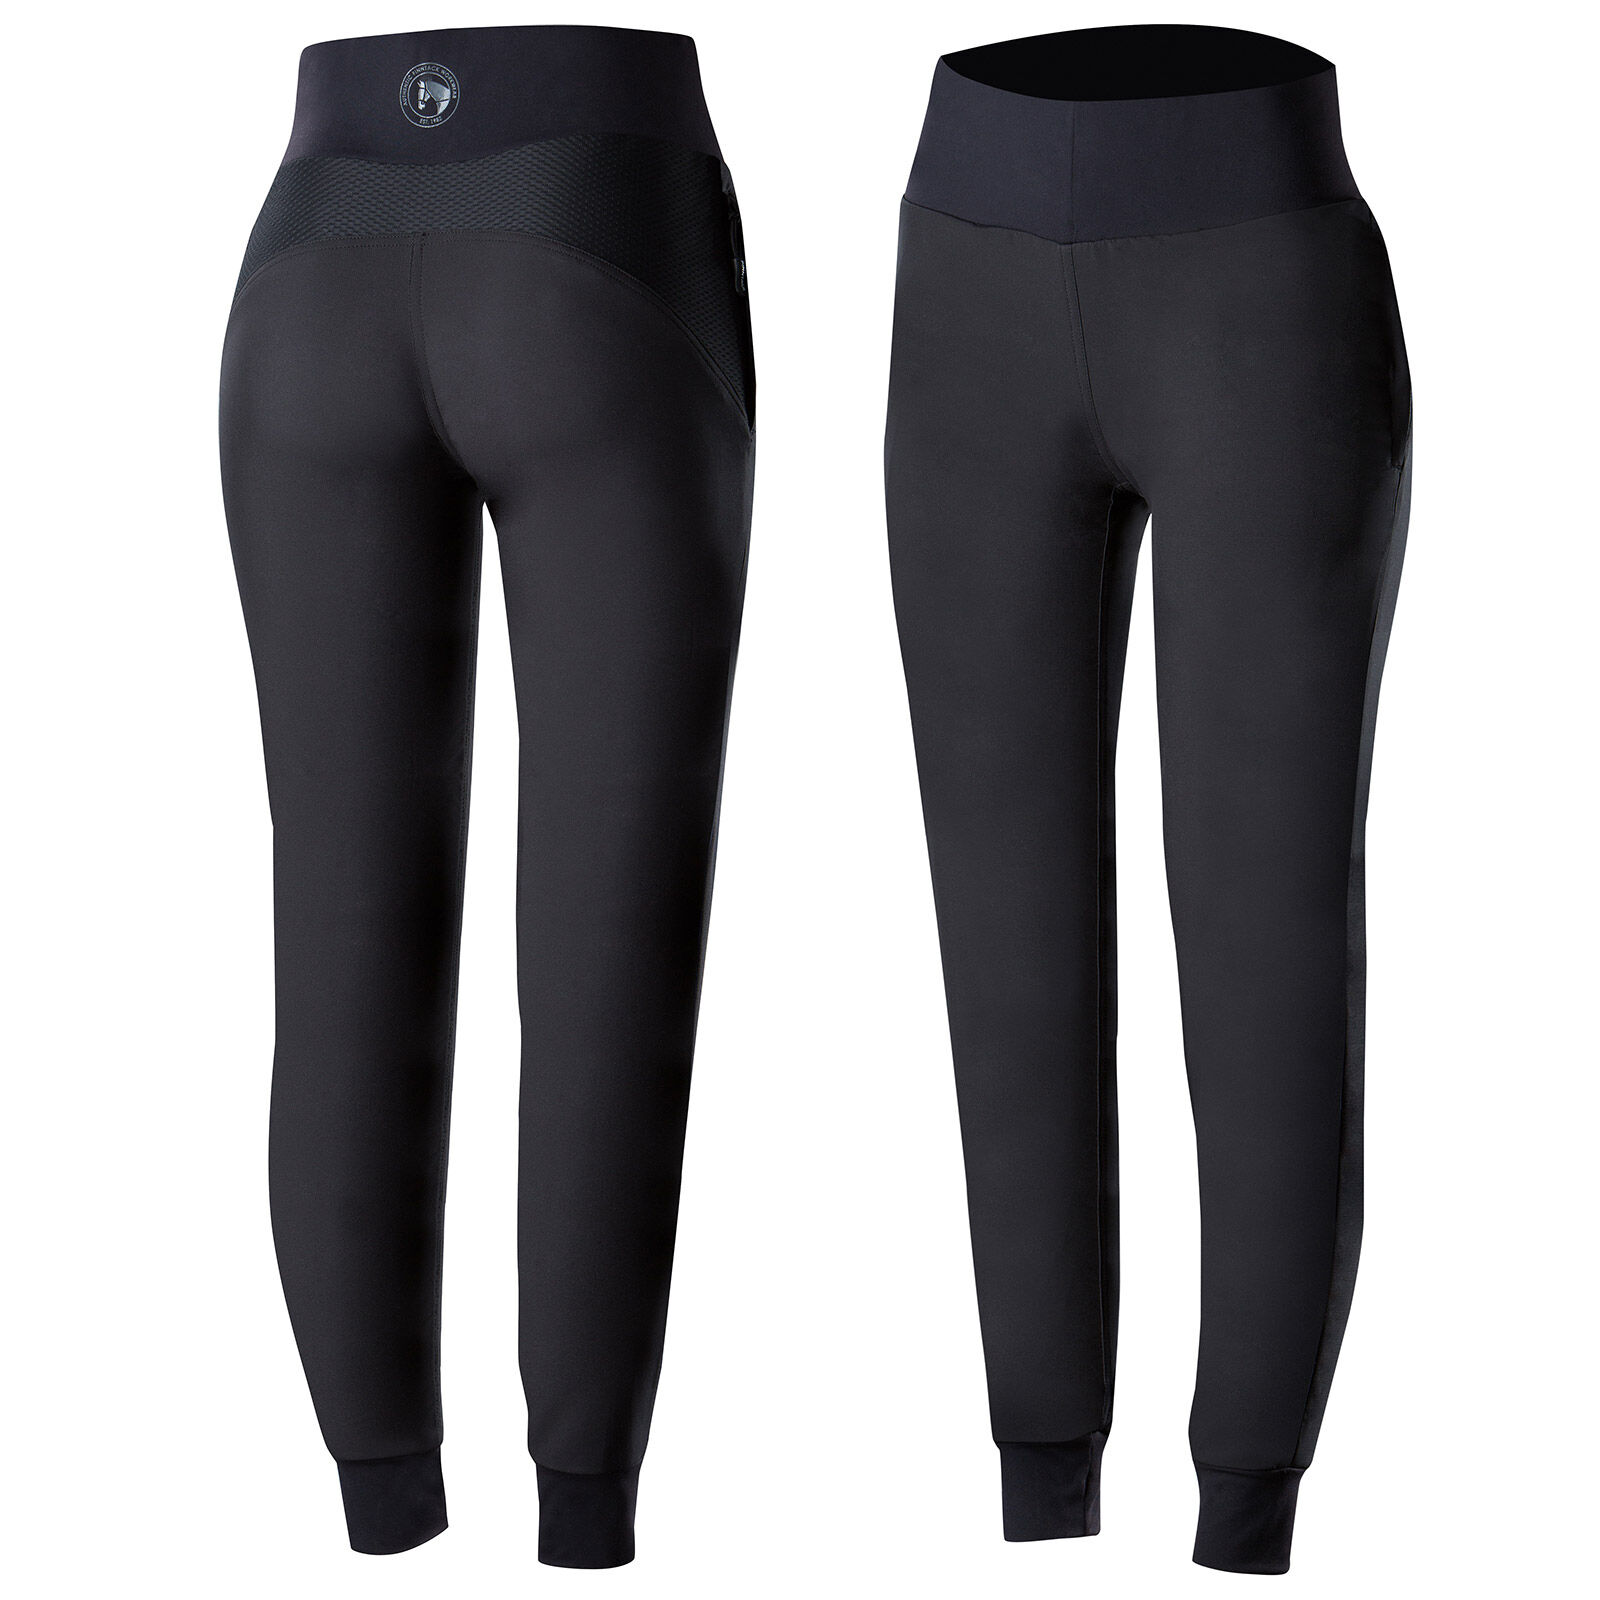 Black Trousers For Women  Black Work Trousers  Roman UK  Page 2